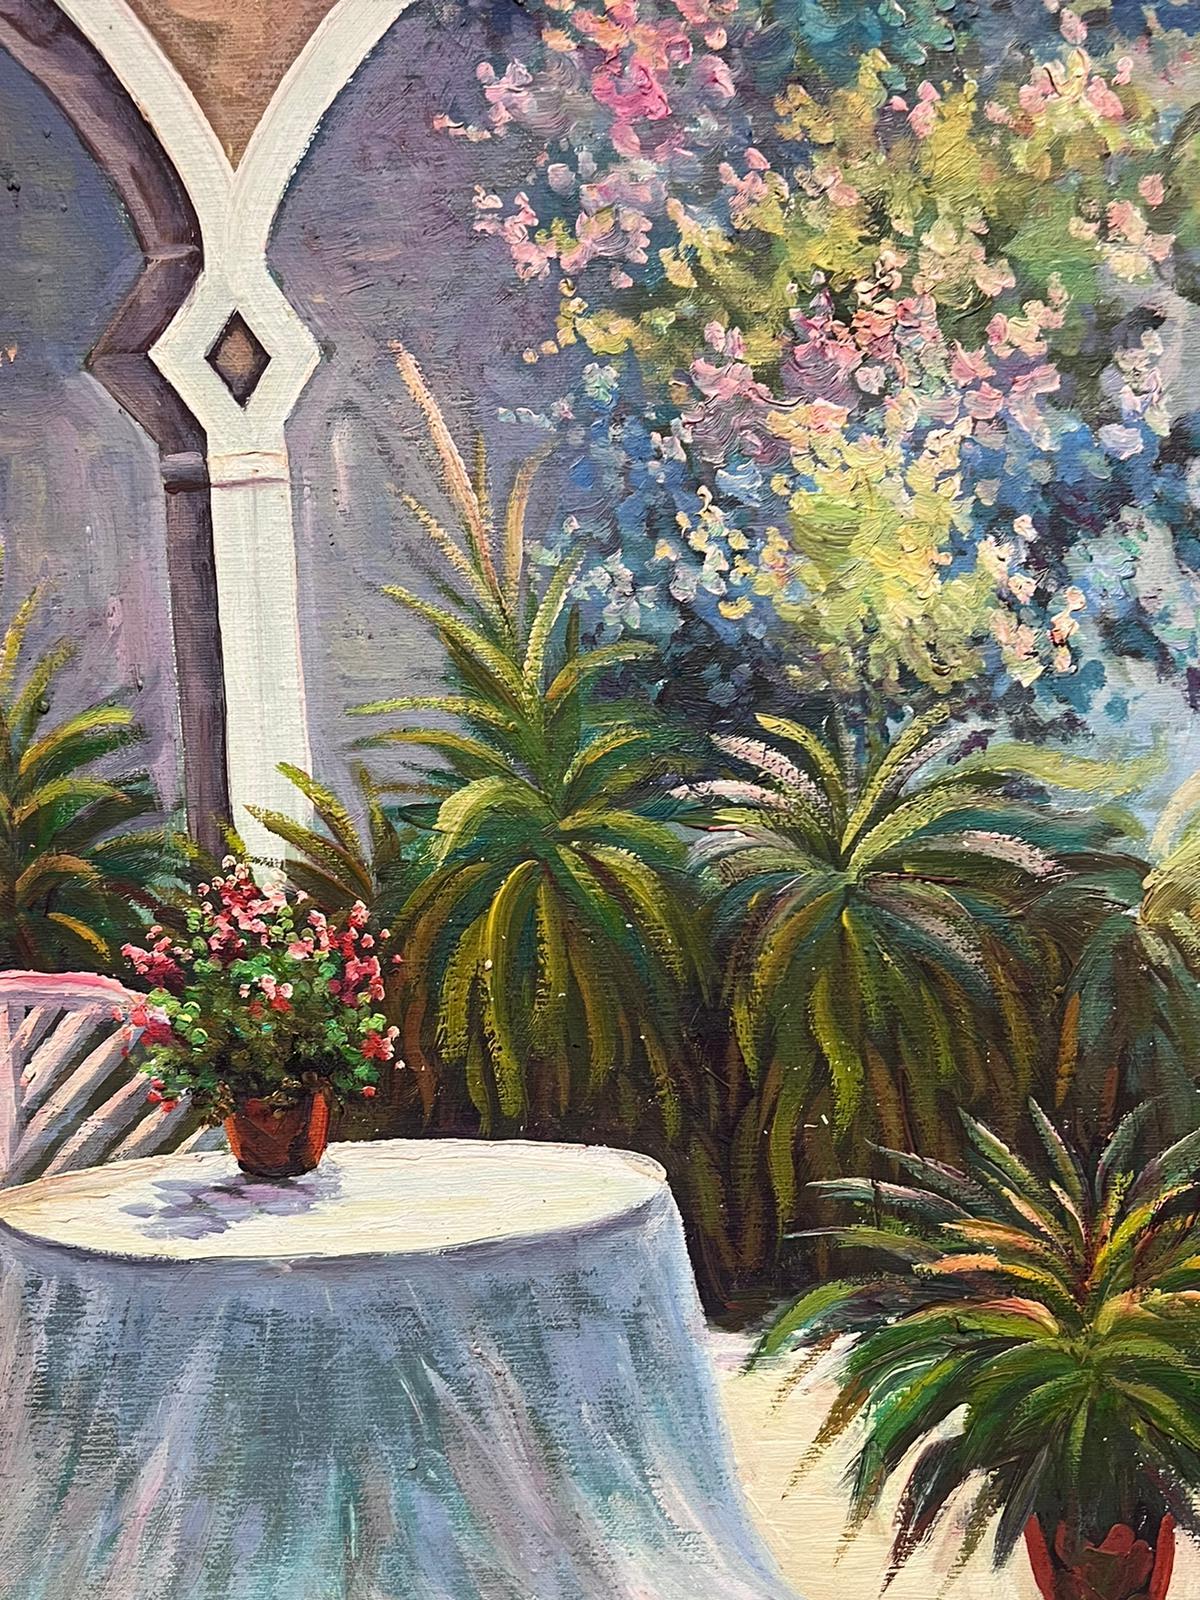 The Garden Conservatory
French School, late 20th century
signed oil on canvas, framed
framed: 24 x 27.5 inches
canvas: 20 x 24.5 inches
provenance: private collection
condition: very good and sound condition 